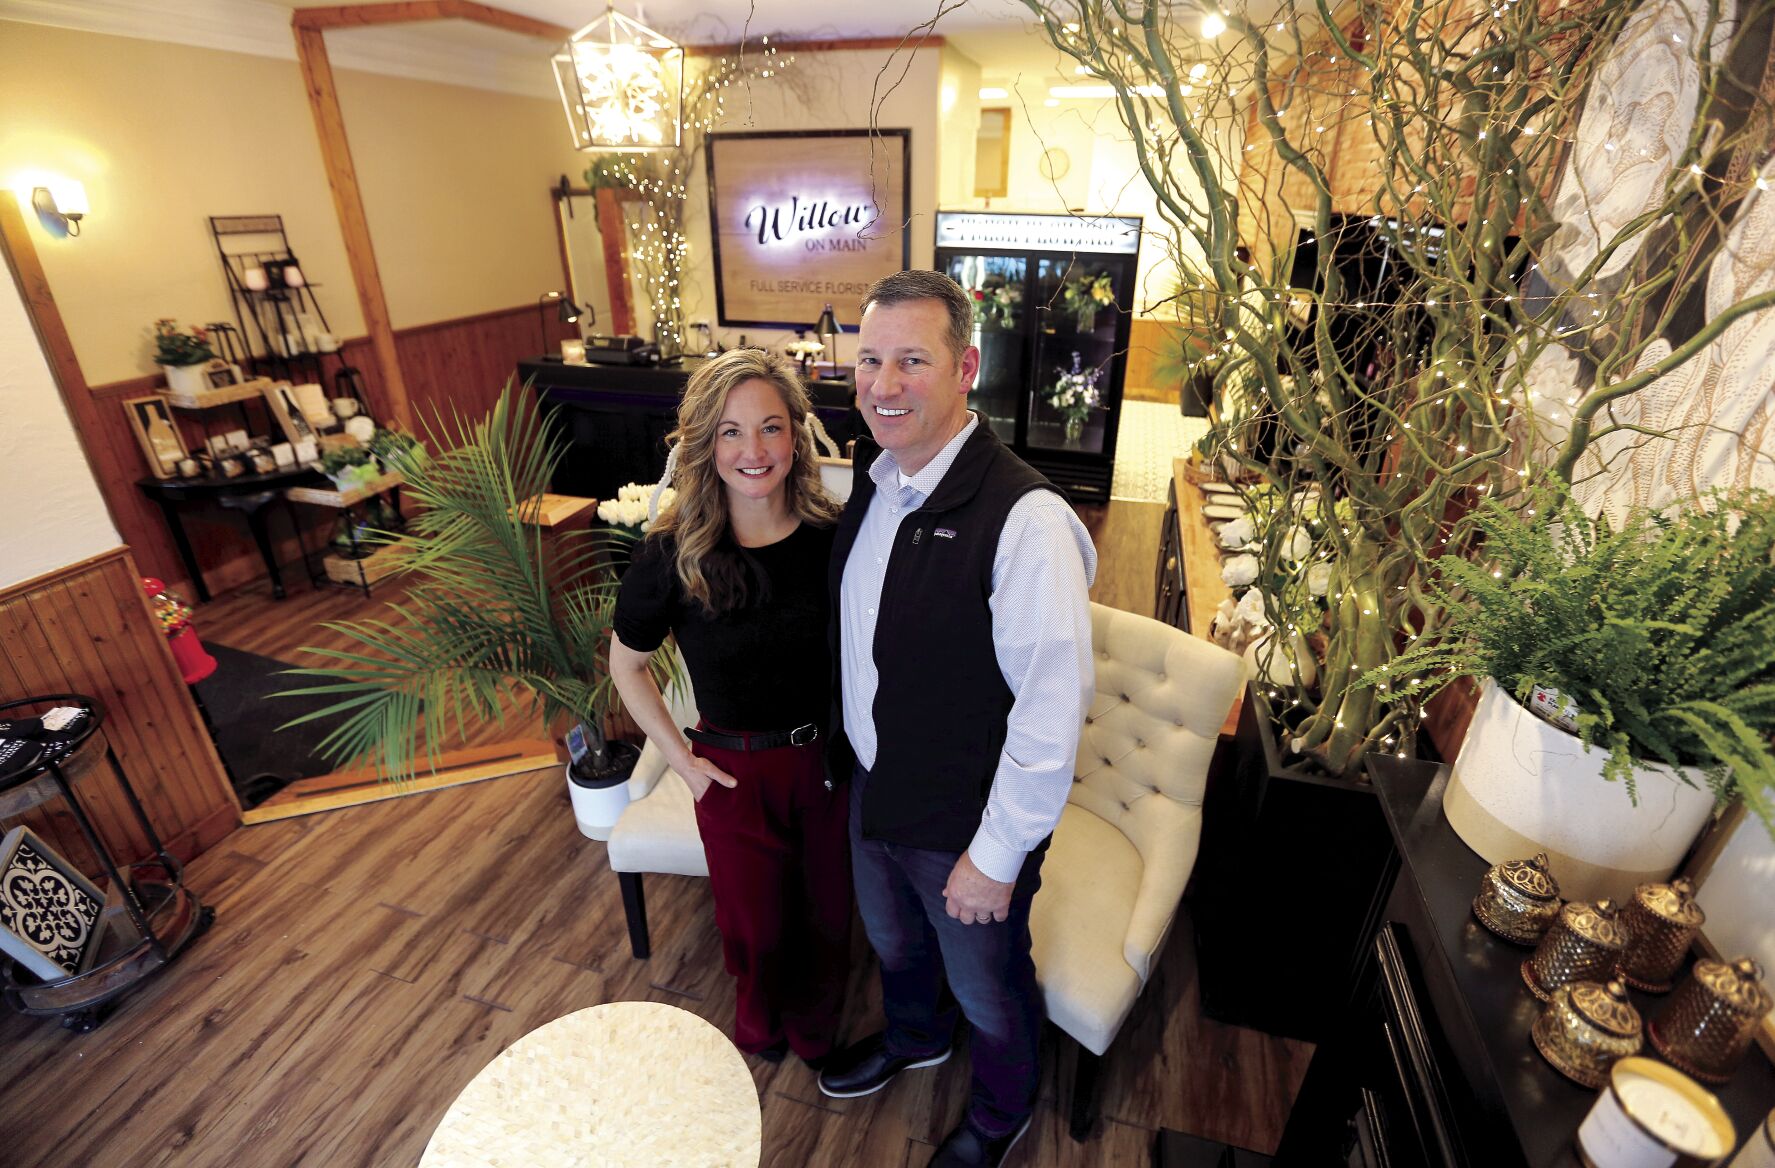 Christina and Bill Taylor, owners of Willow on Main, stand inside their shop in Galena, Ill., on Friday.    PHOTO CREDIT: Dave Kettering